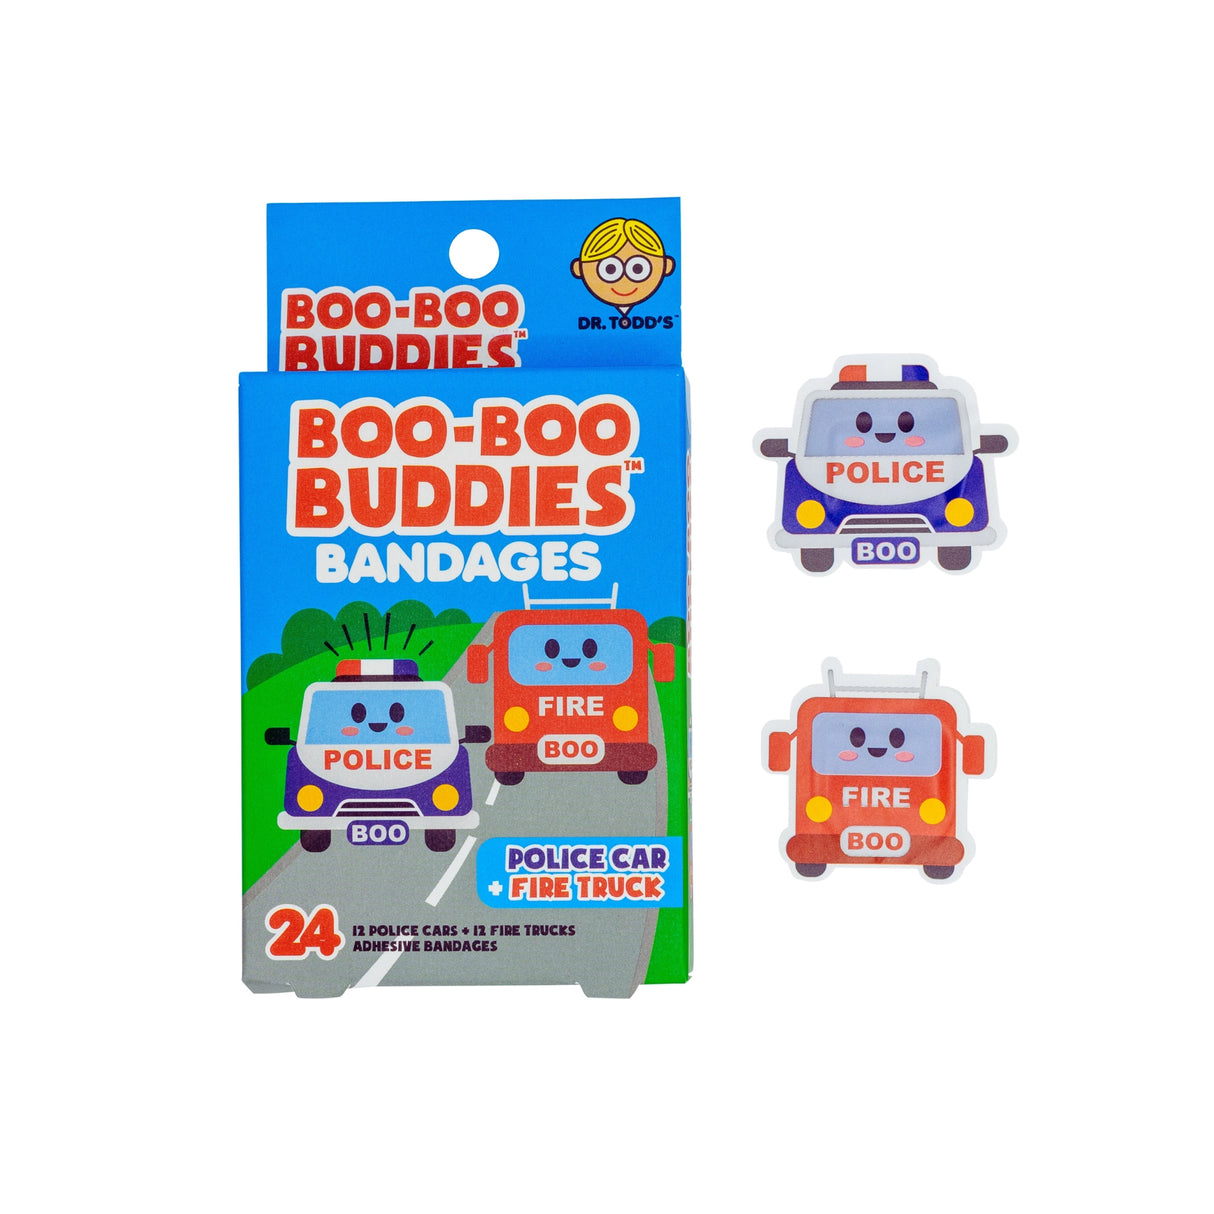 Police Car & Fire Truck Bandages